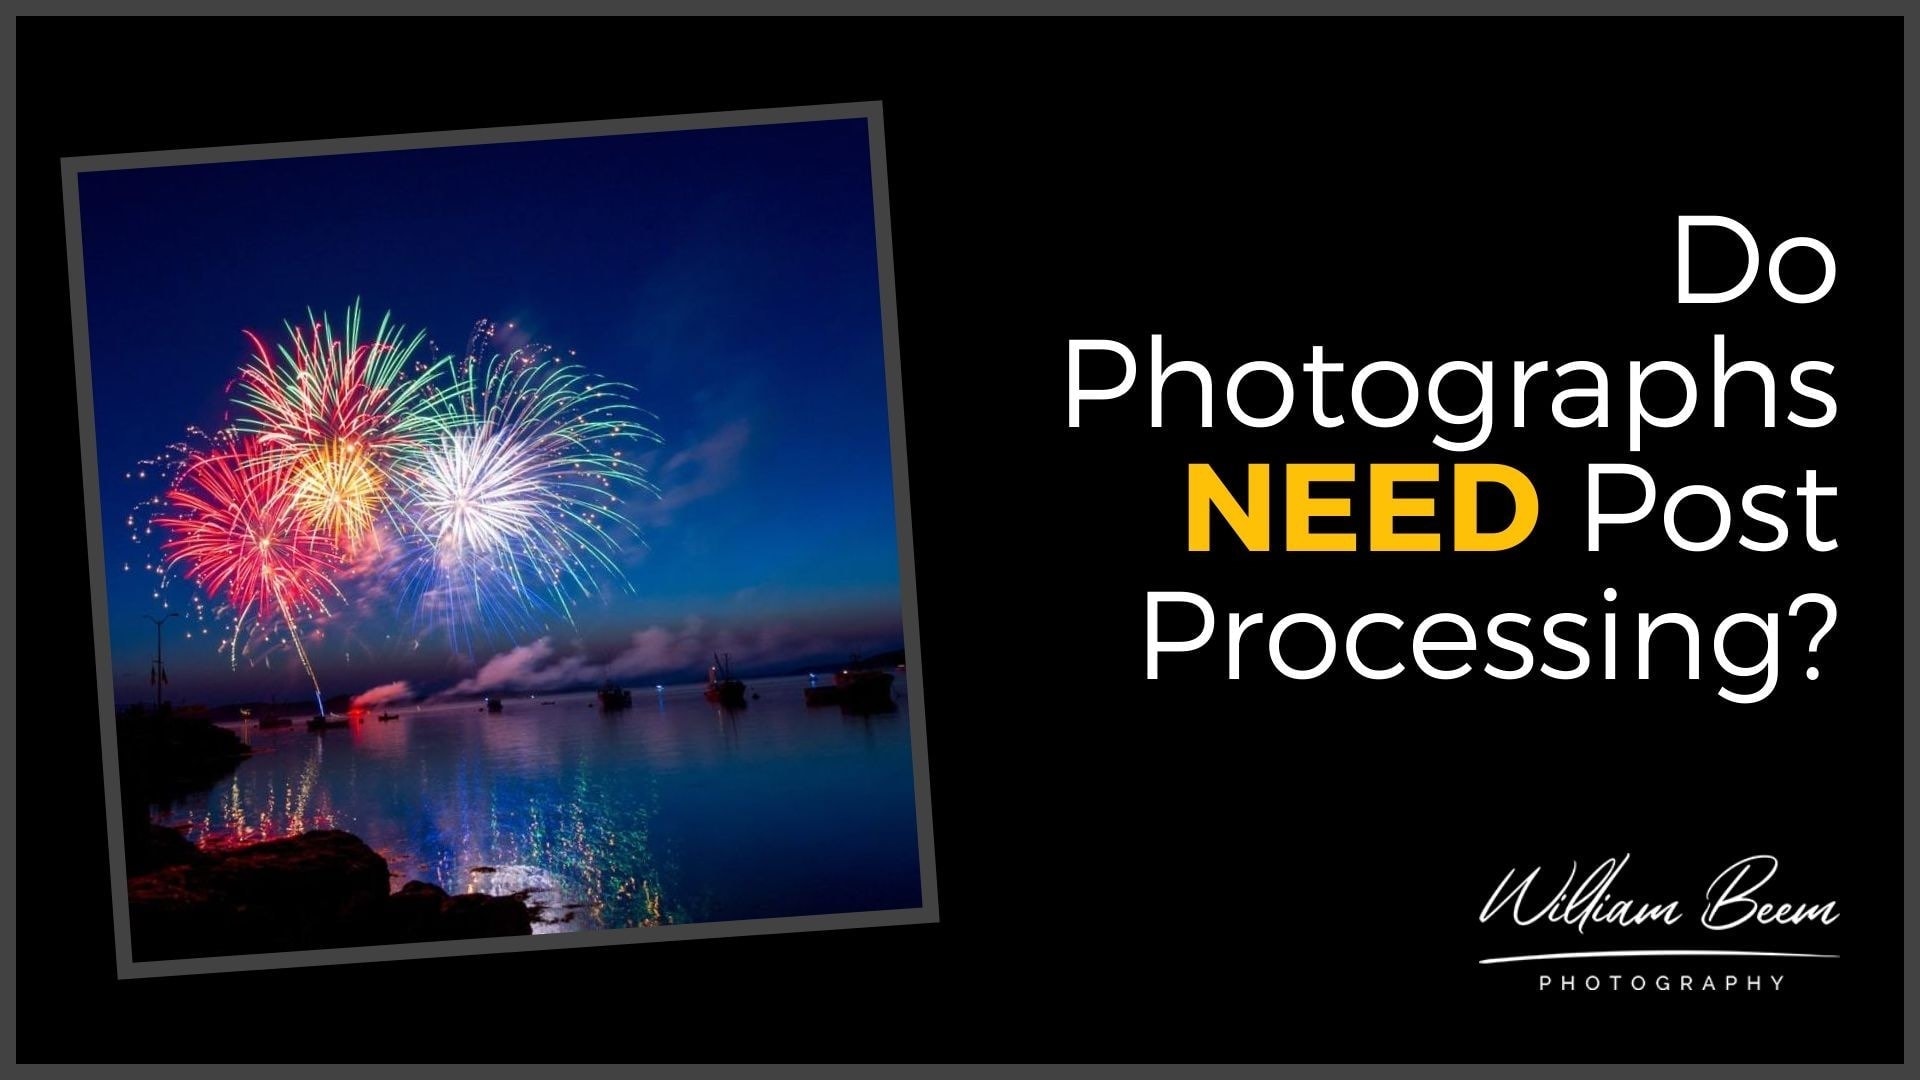 Do Photographs NEED Post Processing to be Great?